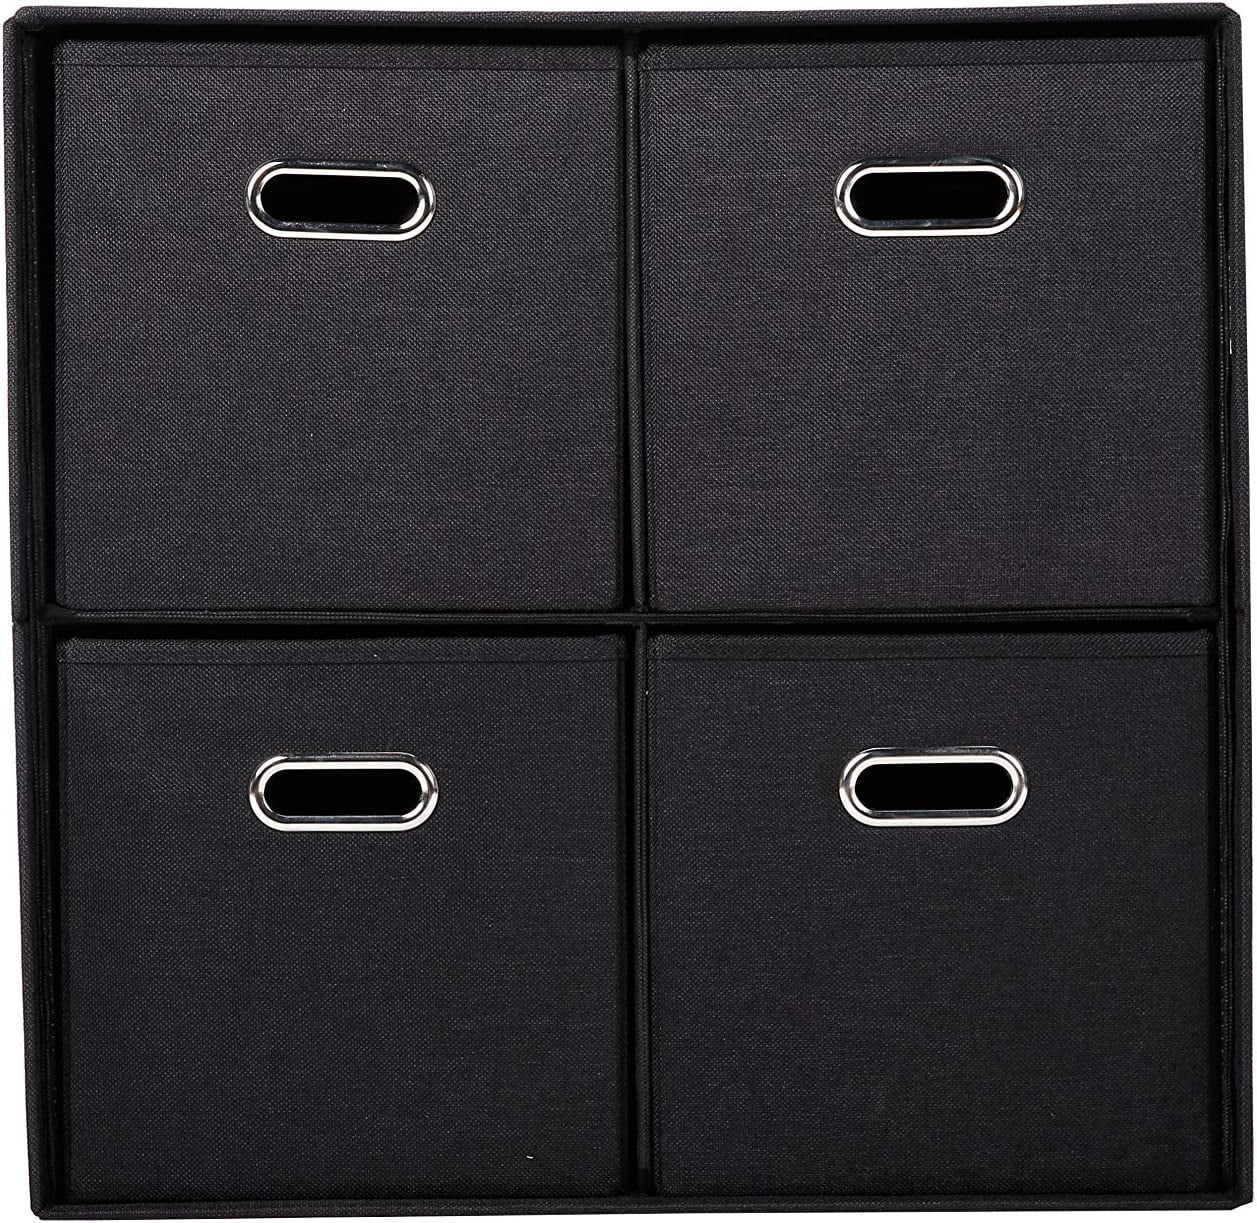 BirdRock Home Navy Linen Cube Organizer Shelf with 4 Storage Bins -  Collapsible Bedroom Fabric Shelves and Cubes - Bed Bath & Beyond - 33828486